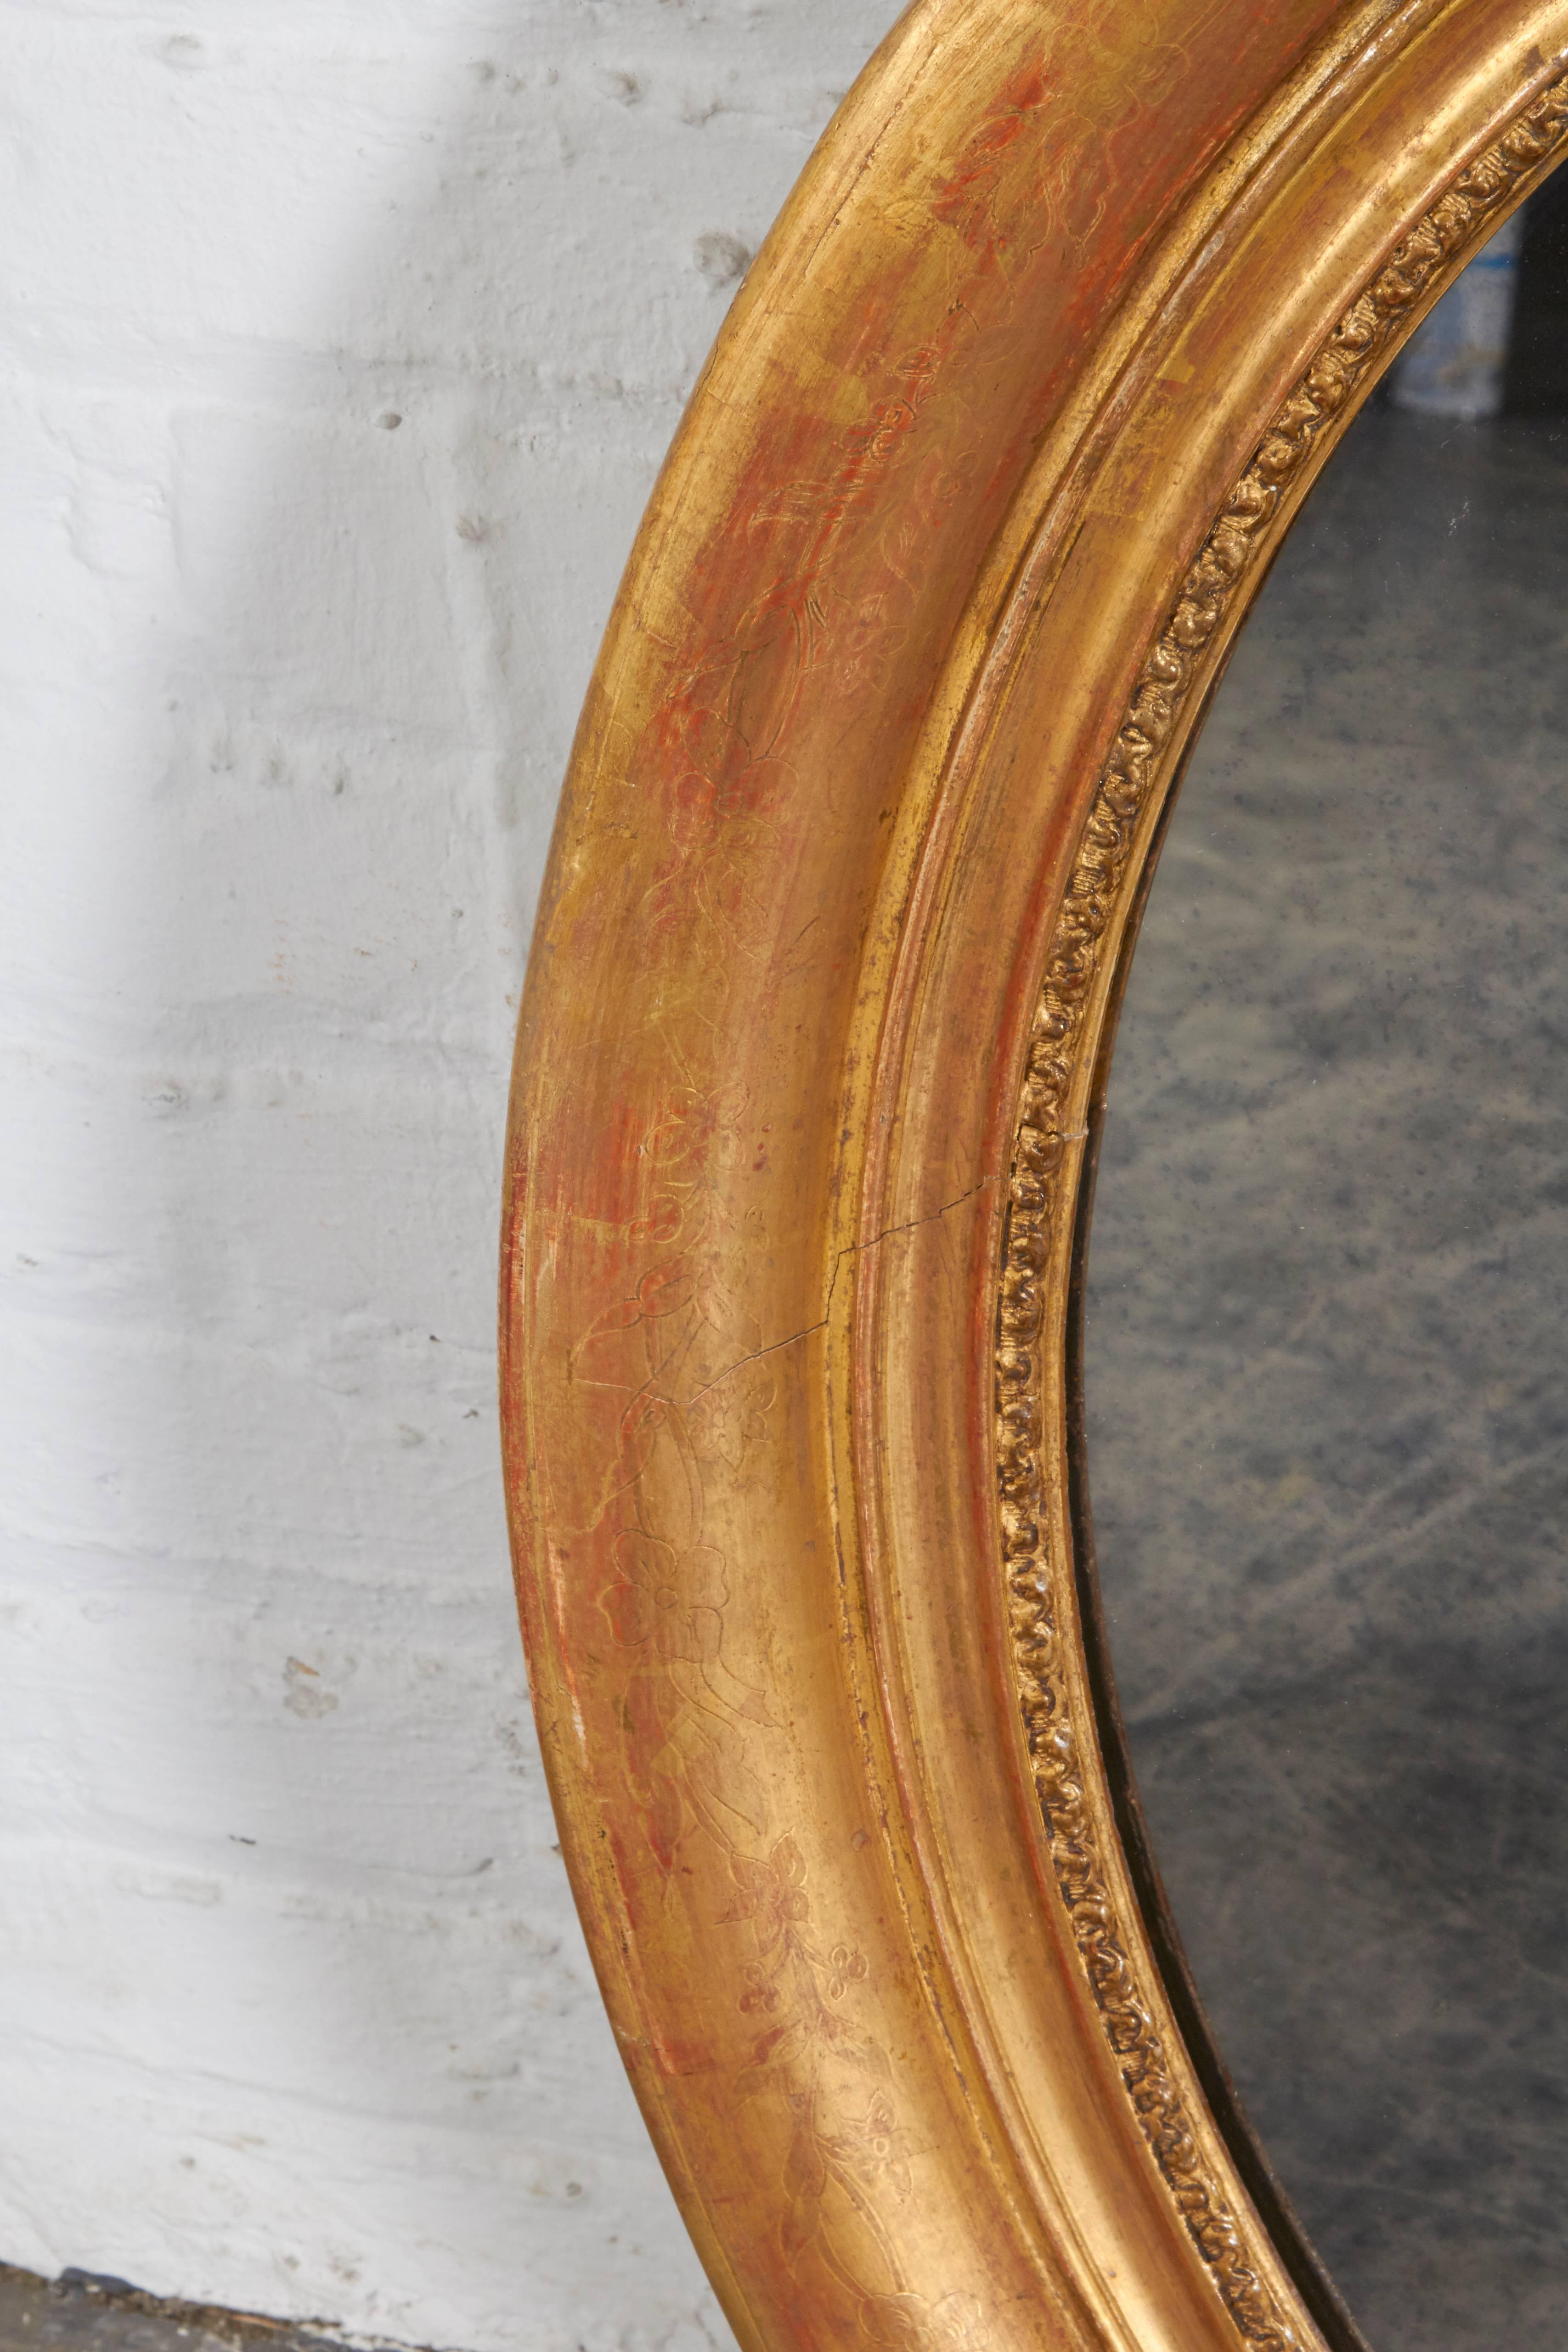 The antiqued mirror plat set within a conforming giltwood frame with delicately incised floral sprays and birds.